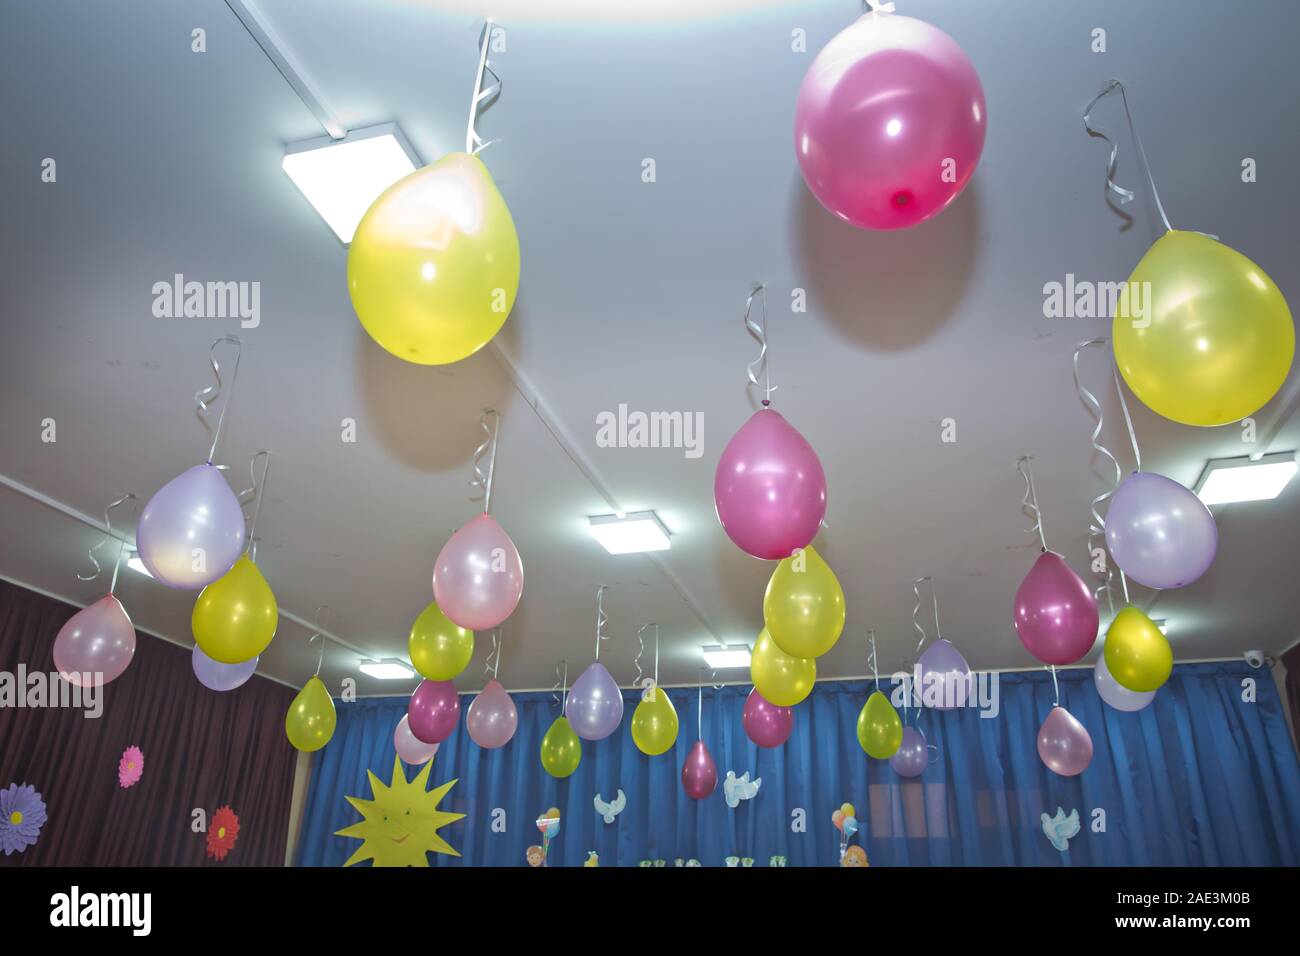 Pink And Yellow Balloons Float On The White Ceiling In The Room